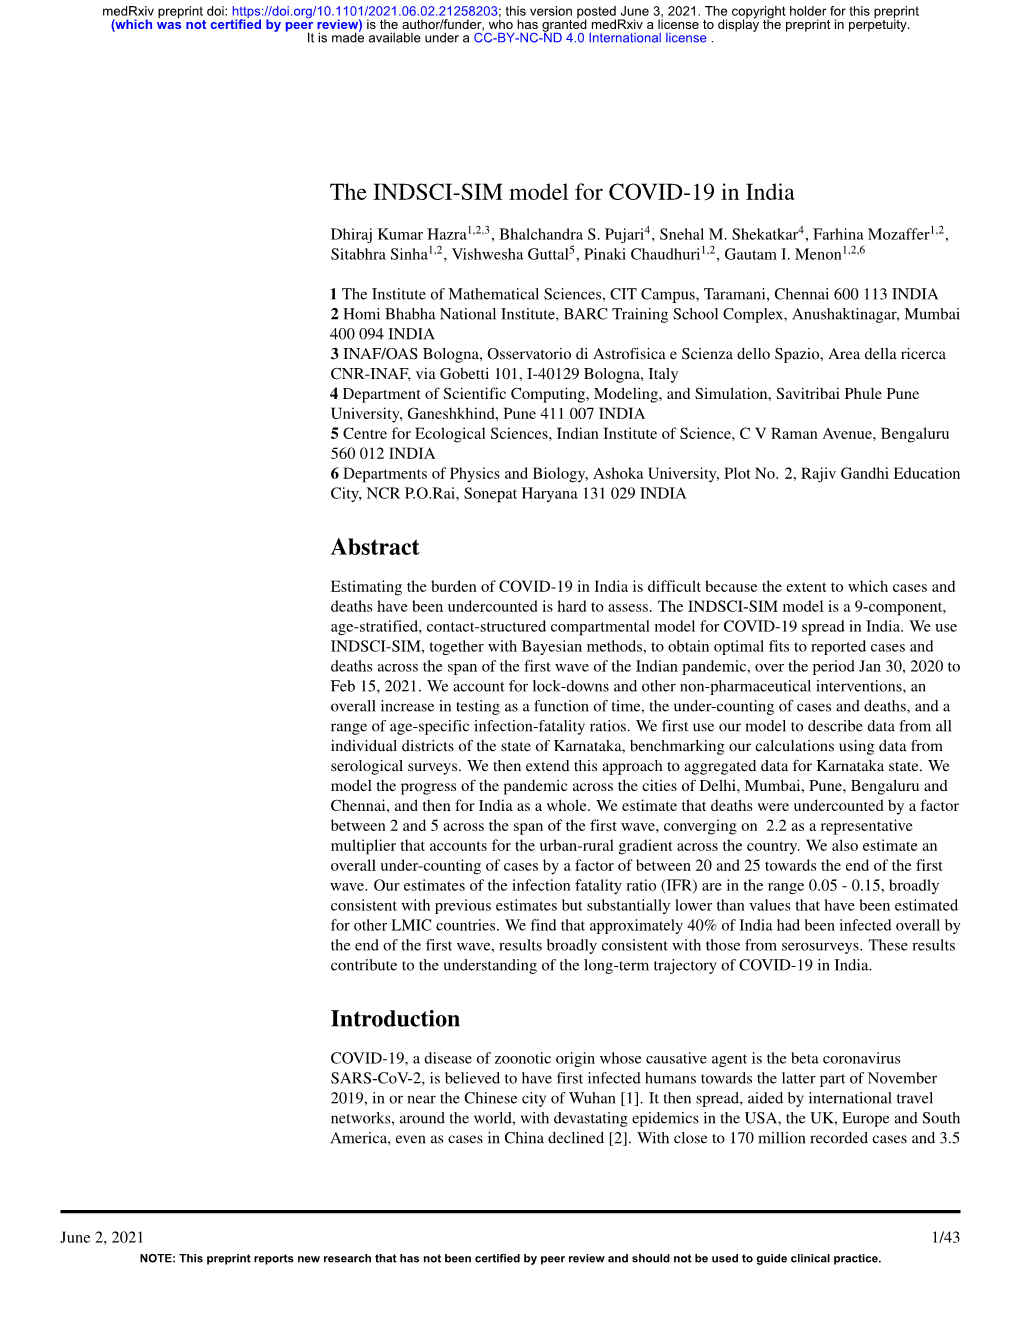 The INDSCI-SIM Model for COVID-19 in India